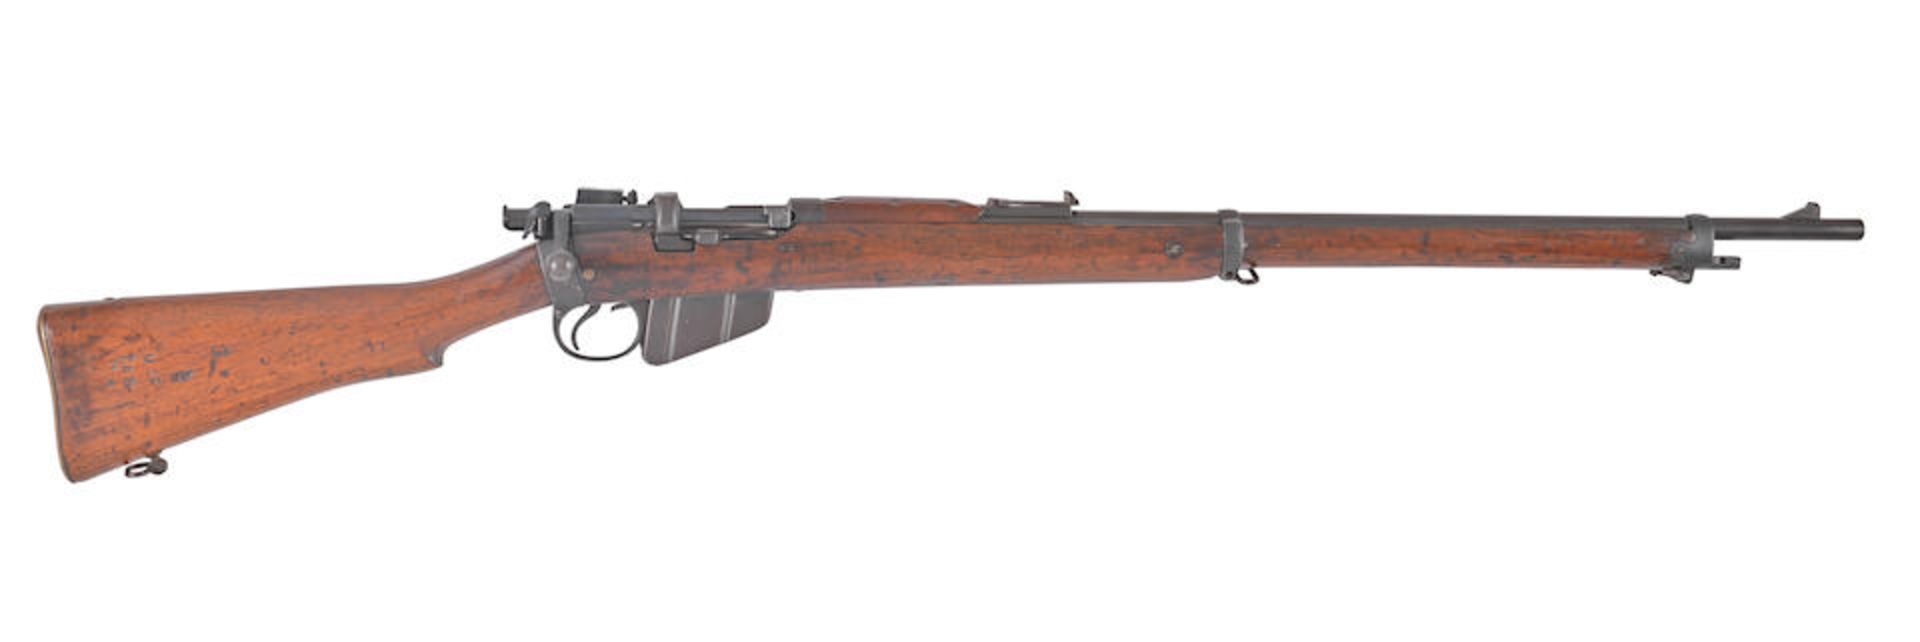 A deactivated .303 (British) 'Charger-loading Lee-Enfield' service rifle by Enfield, no. 4860R W...